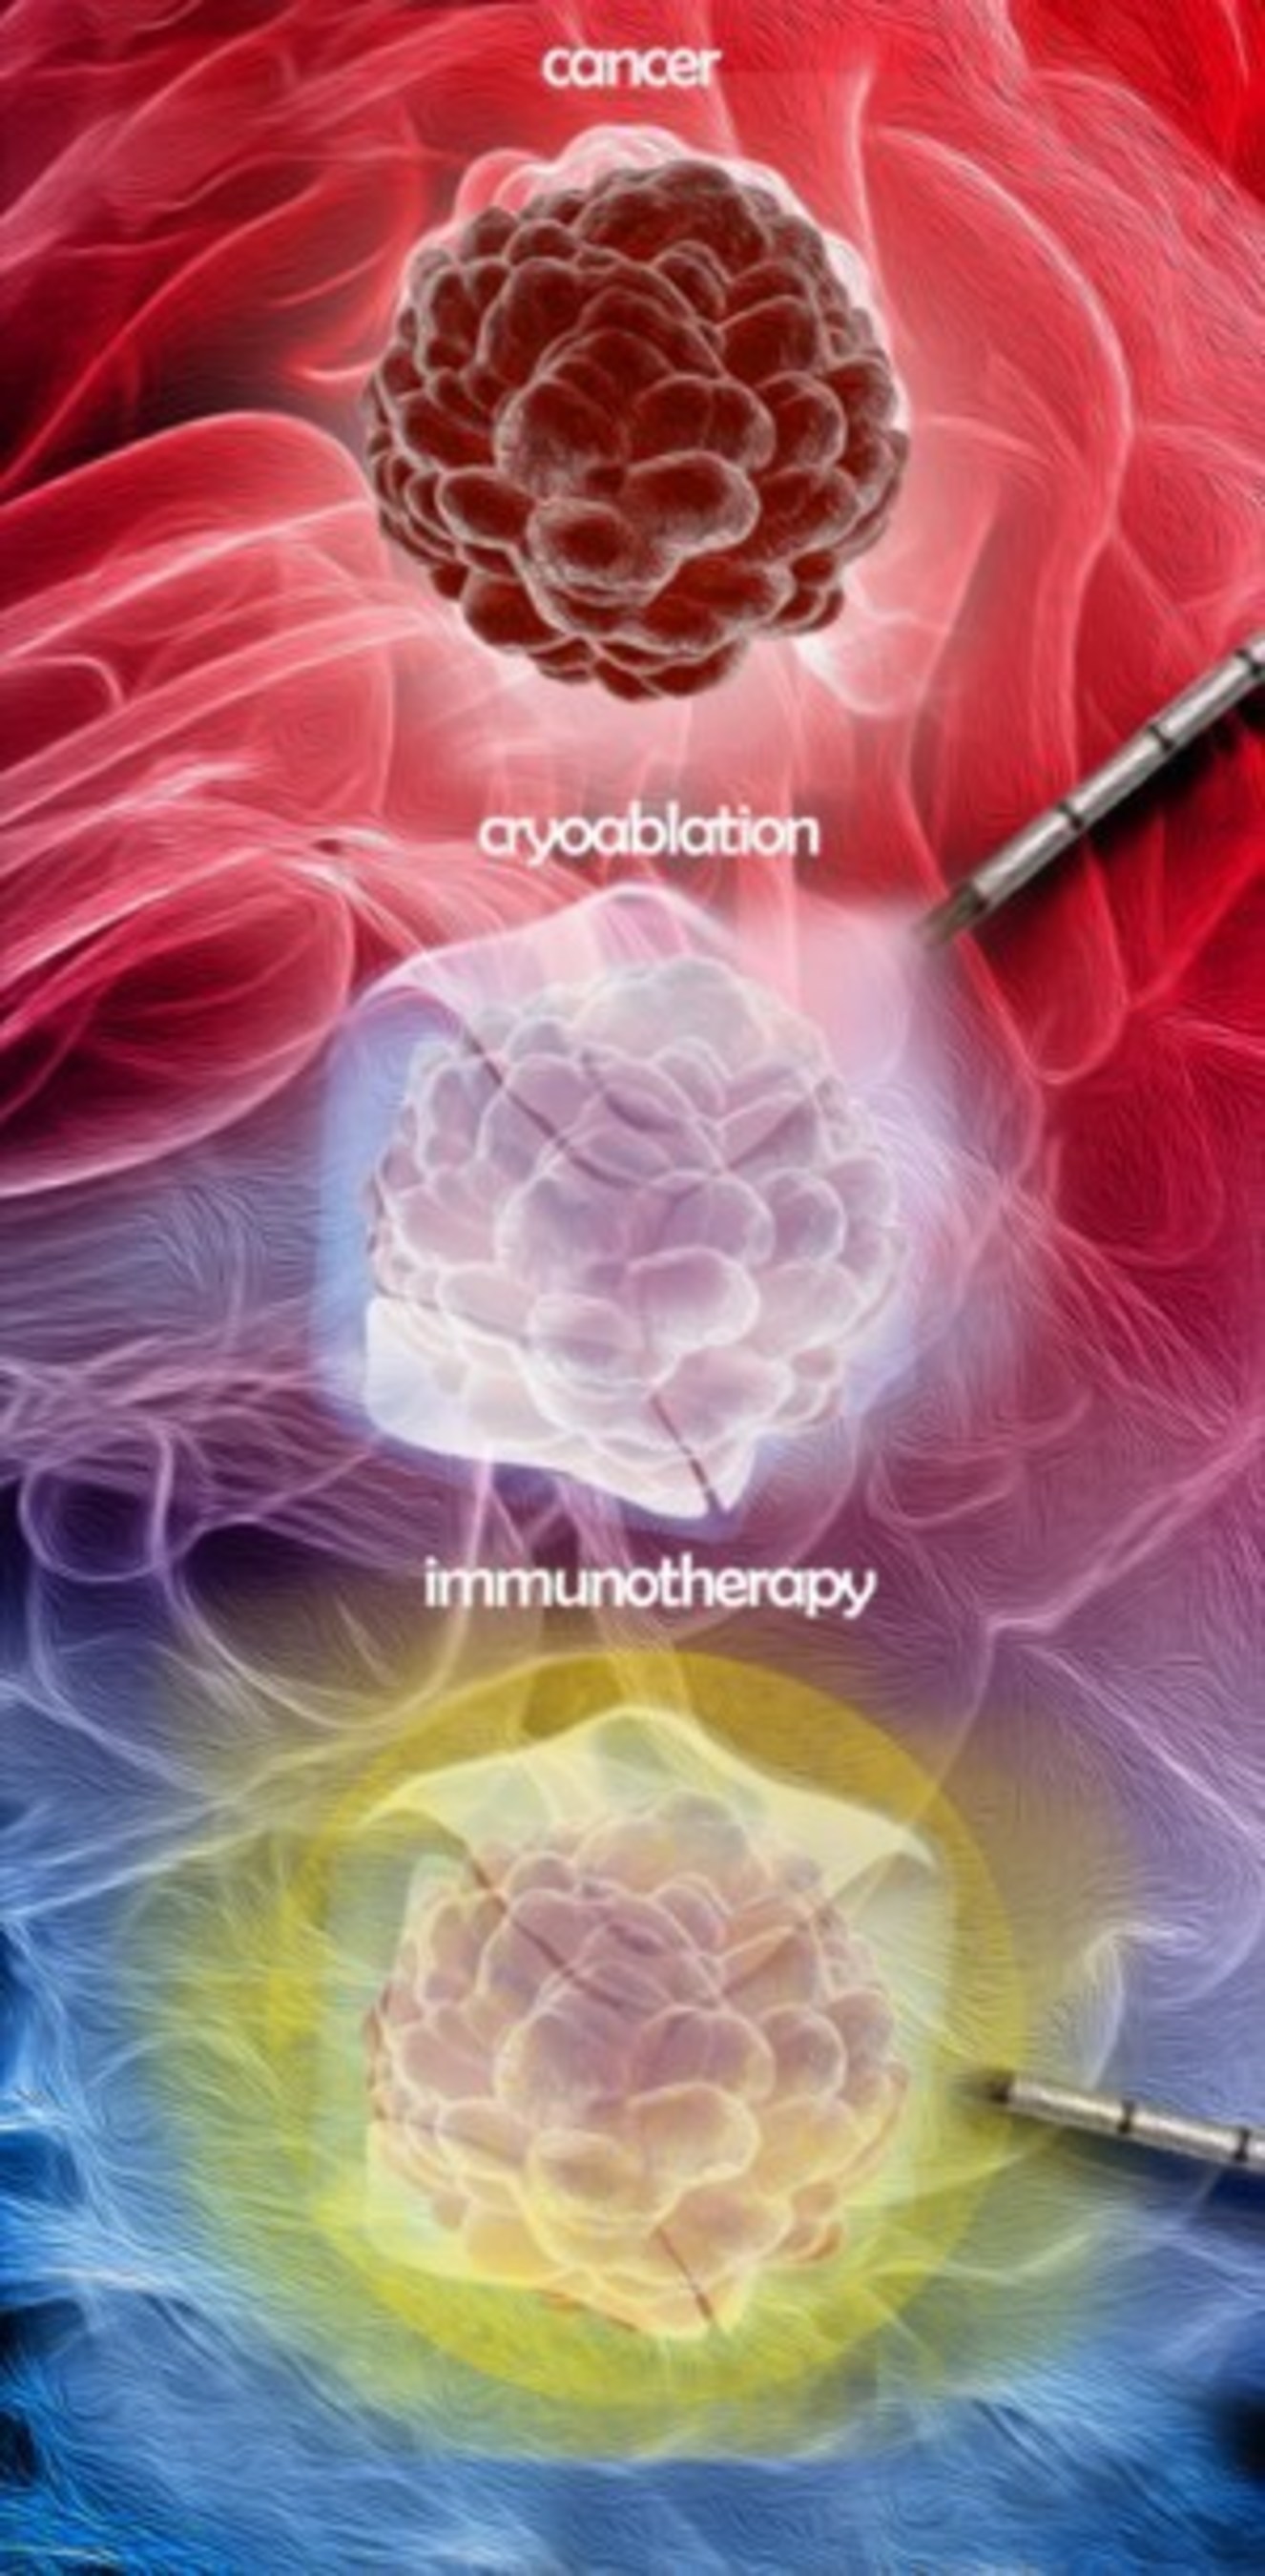 Cryoablation Immunotherapy